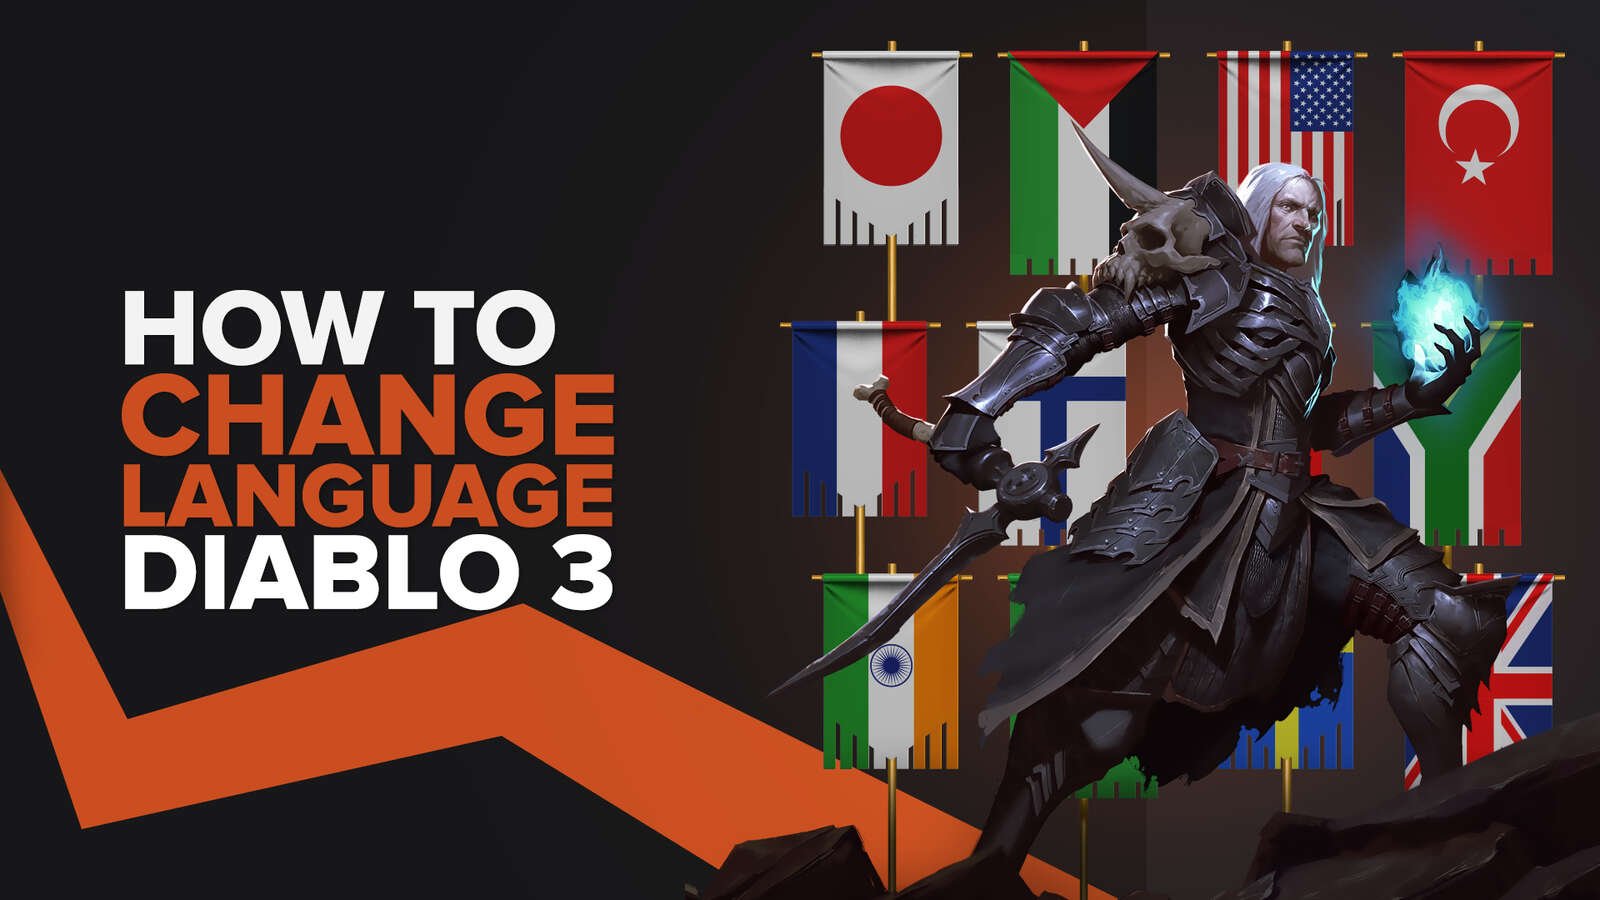 How To Quickly Change Language in Diablo 3